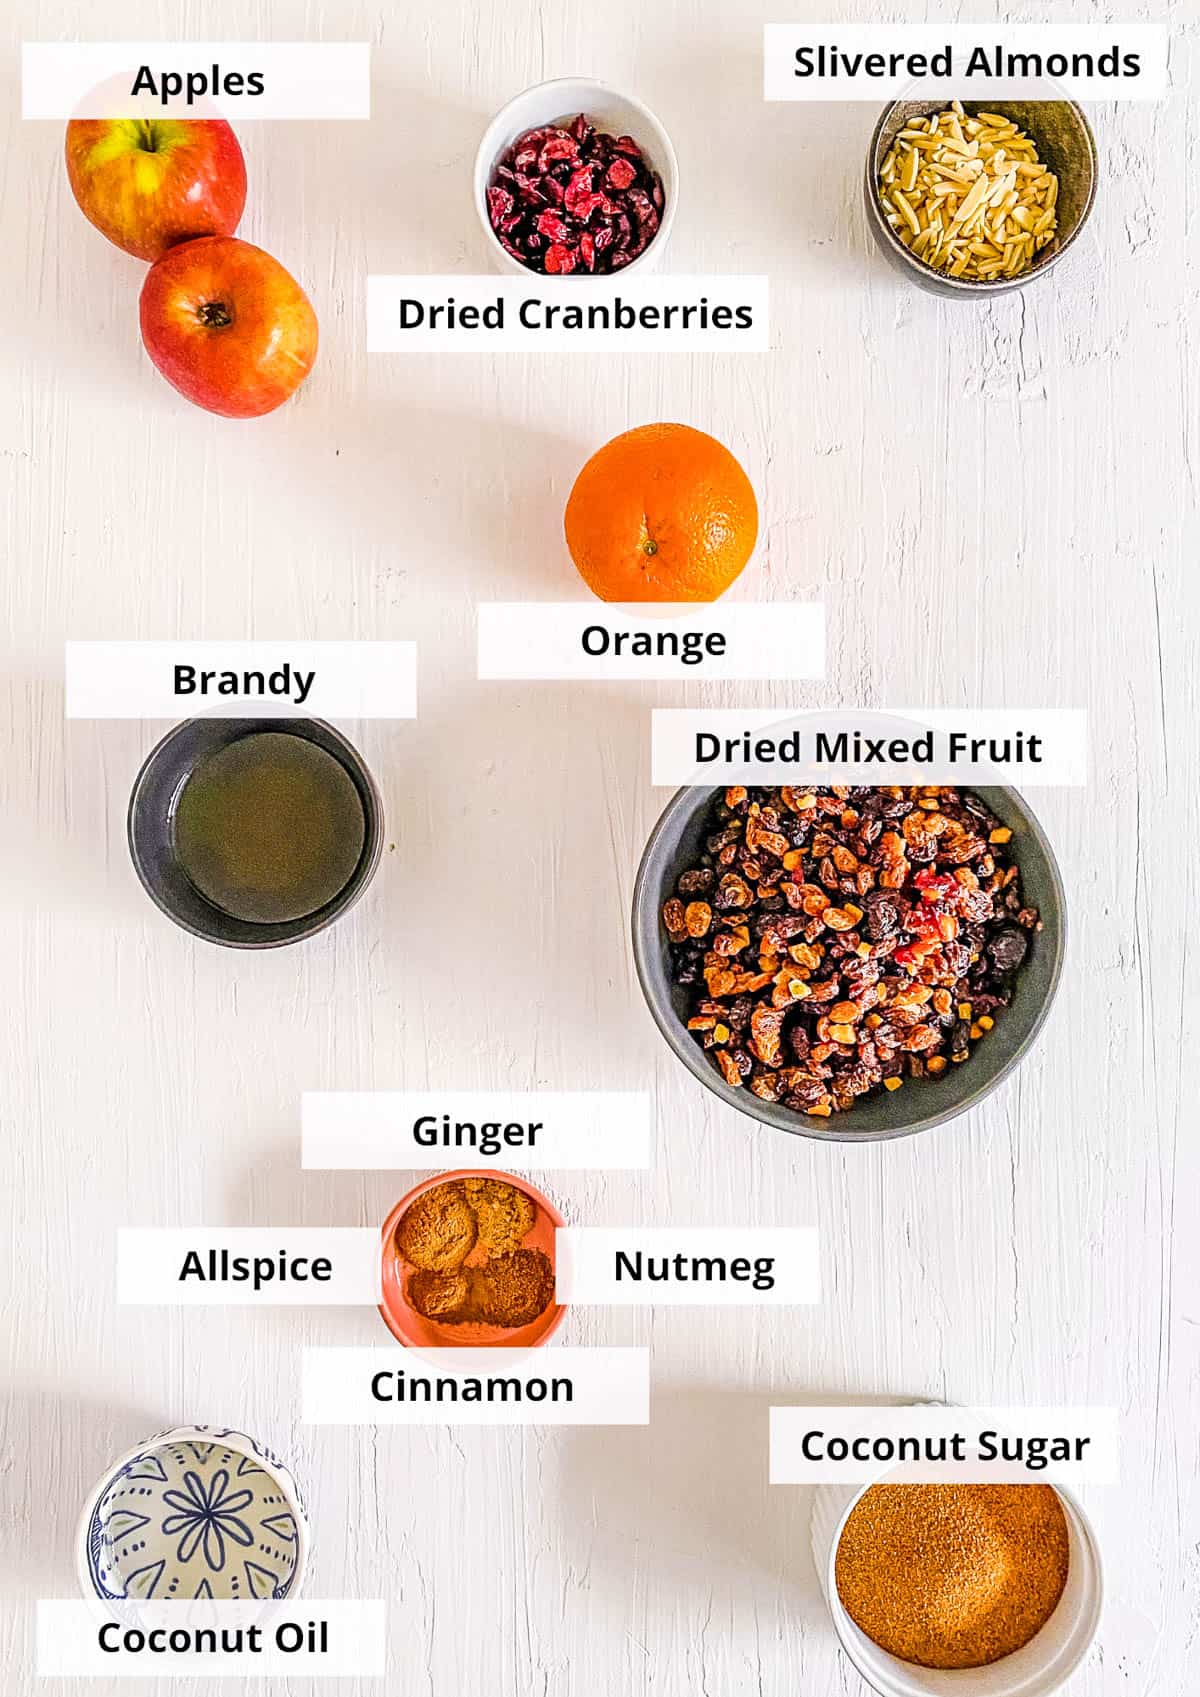 Ingredients for vegan mincemeat recipe against a white background.